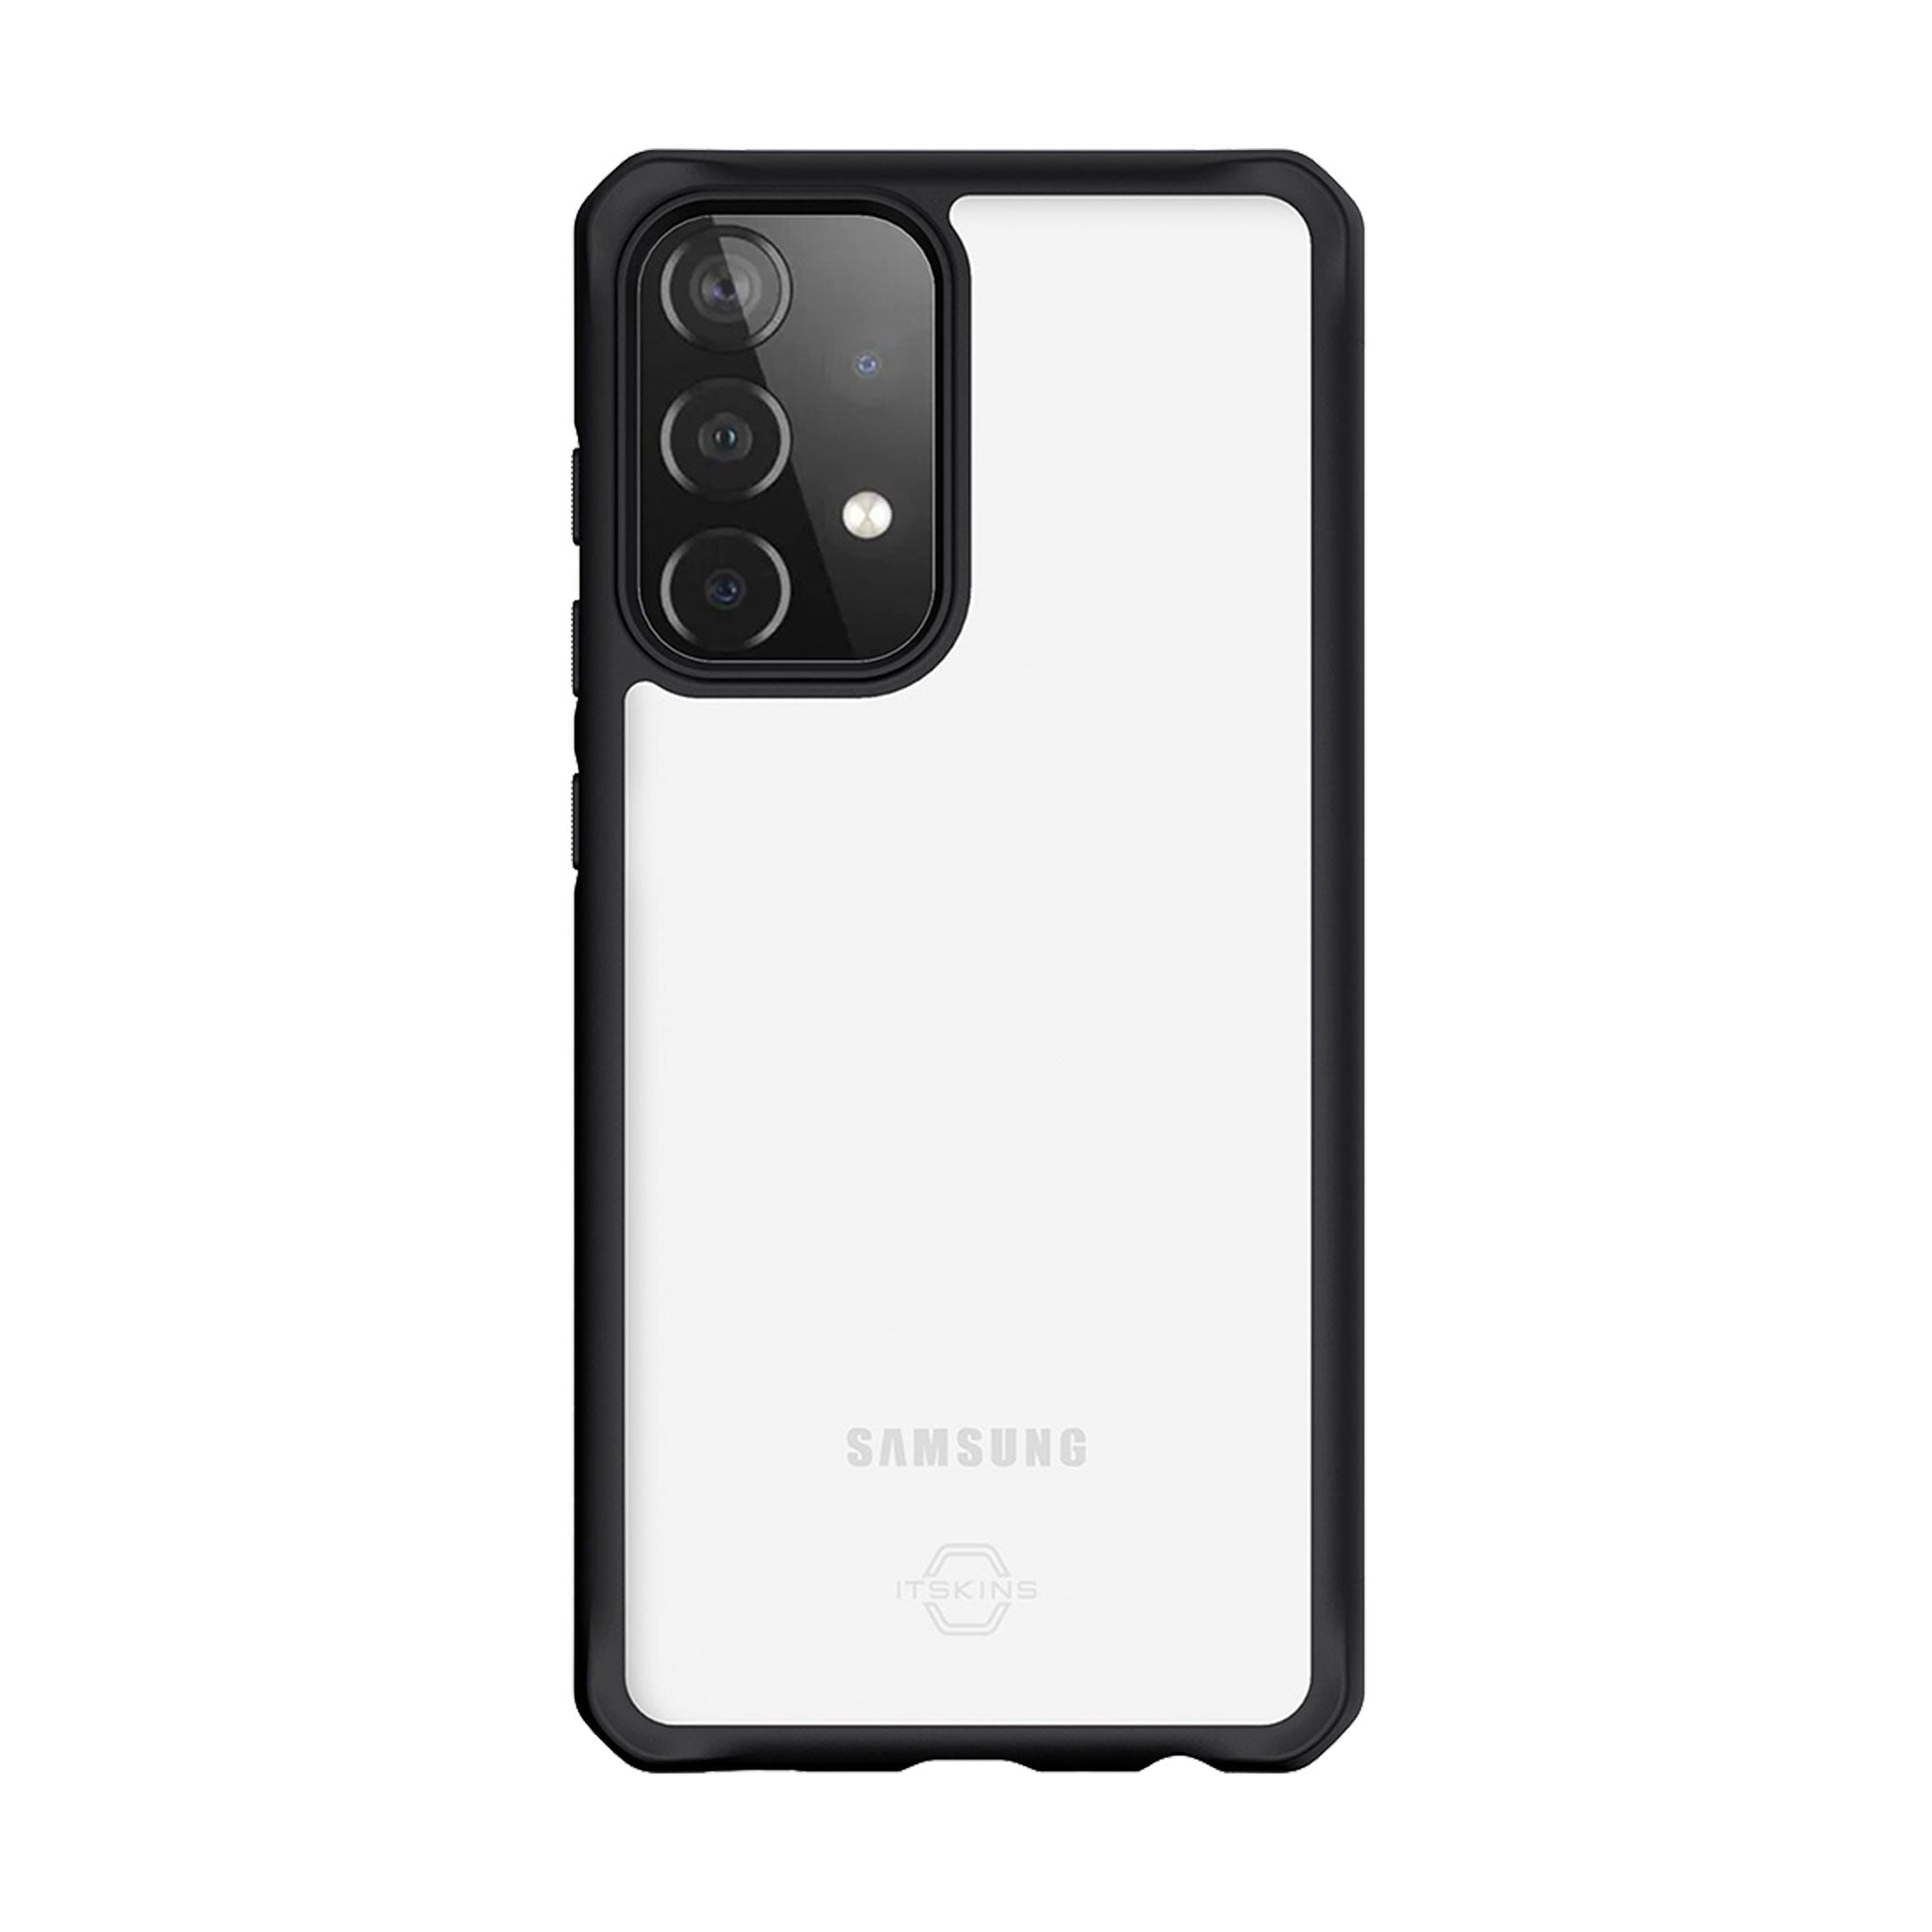 Itskins - Hybrid Solid Case For Samsung Galaxy A52 / A52 5g - Black And Transparent